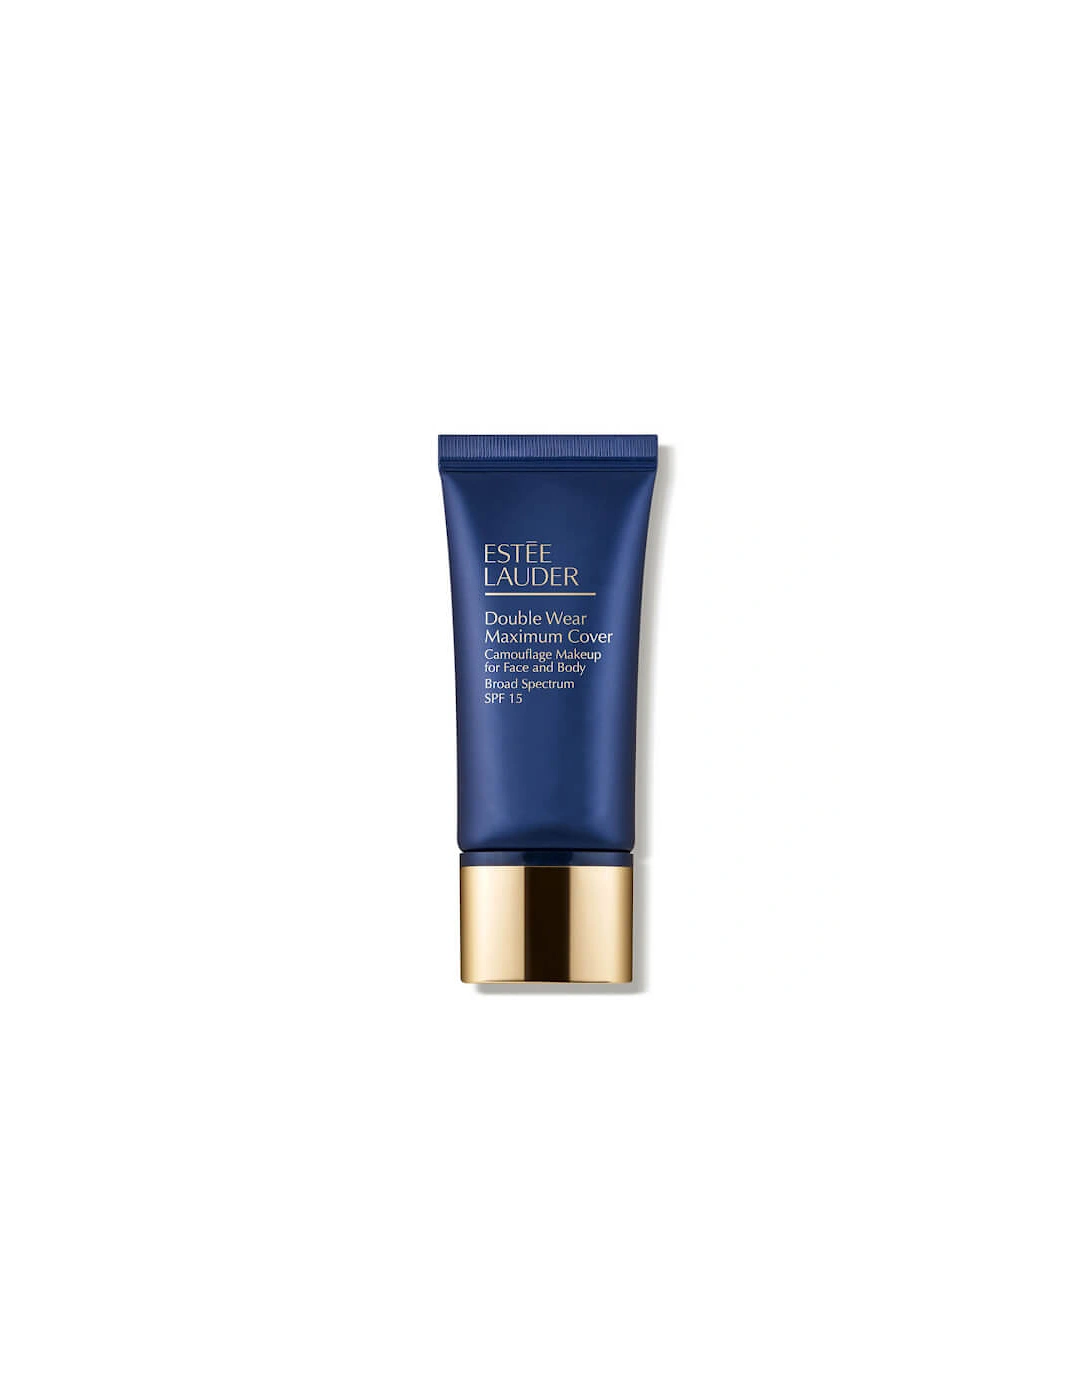 Estée Lauder Double Wear Maximum Cover Camouflage Makeup for Face and Body SPF15 - 3N1 Ivory Beige, 2 of 1